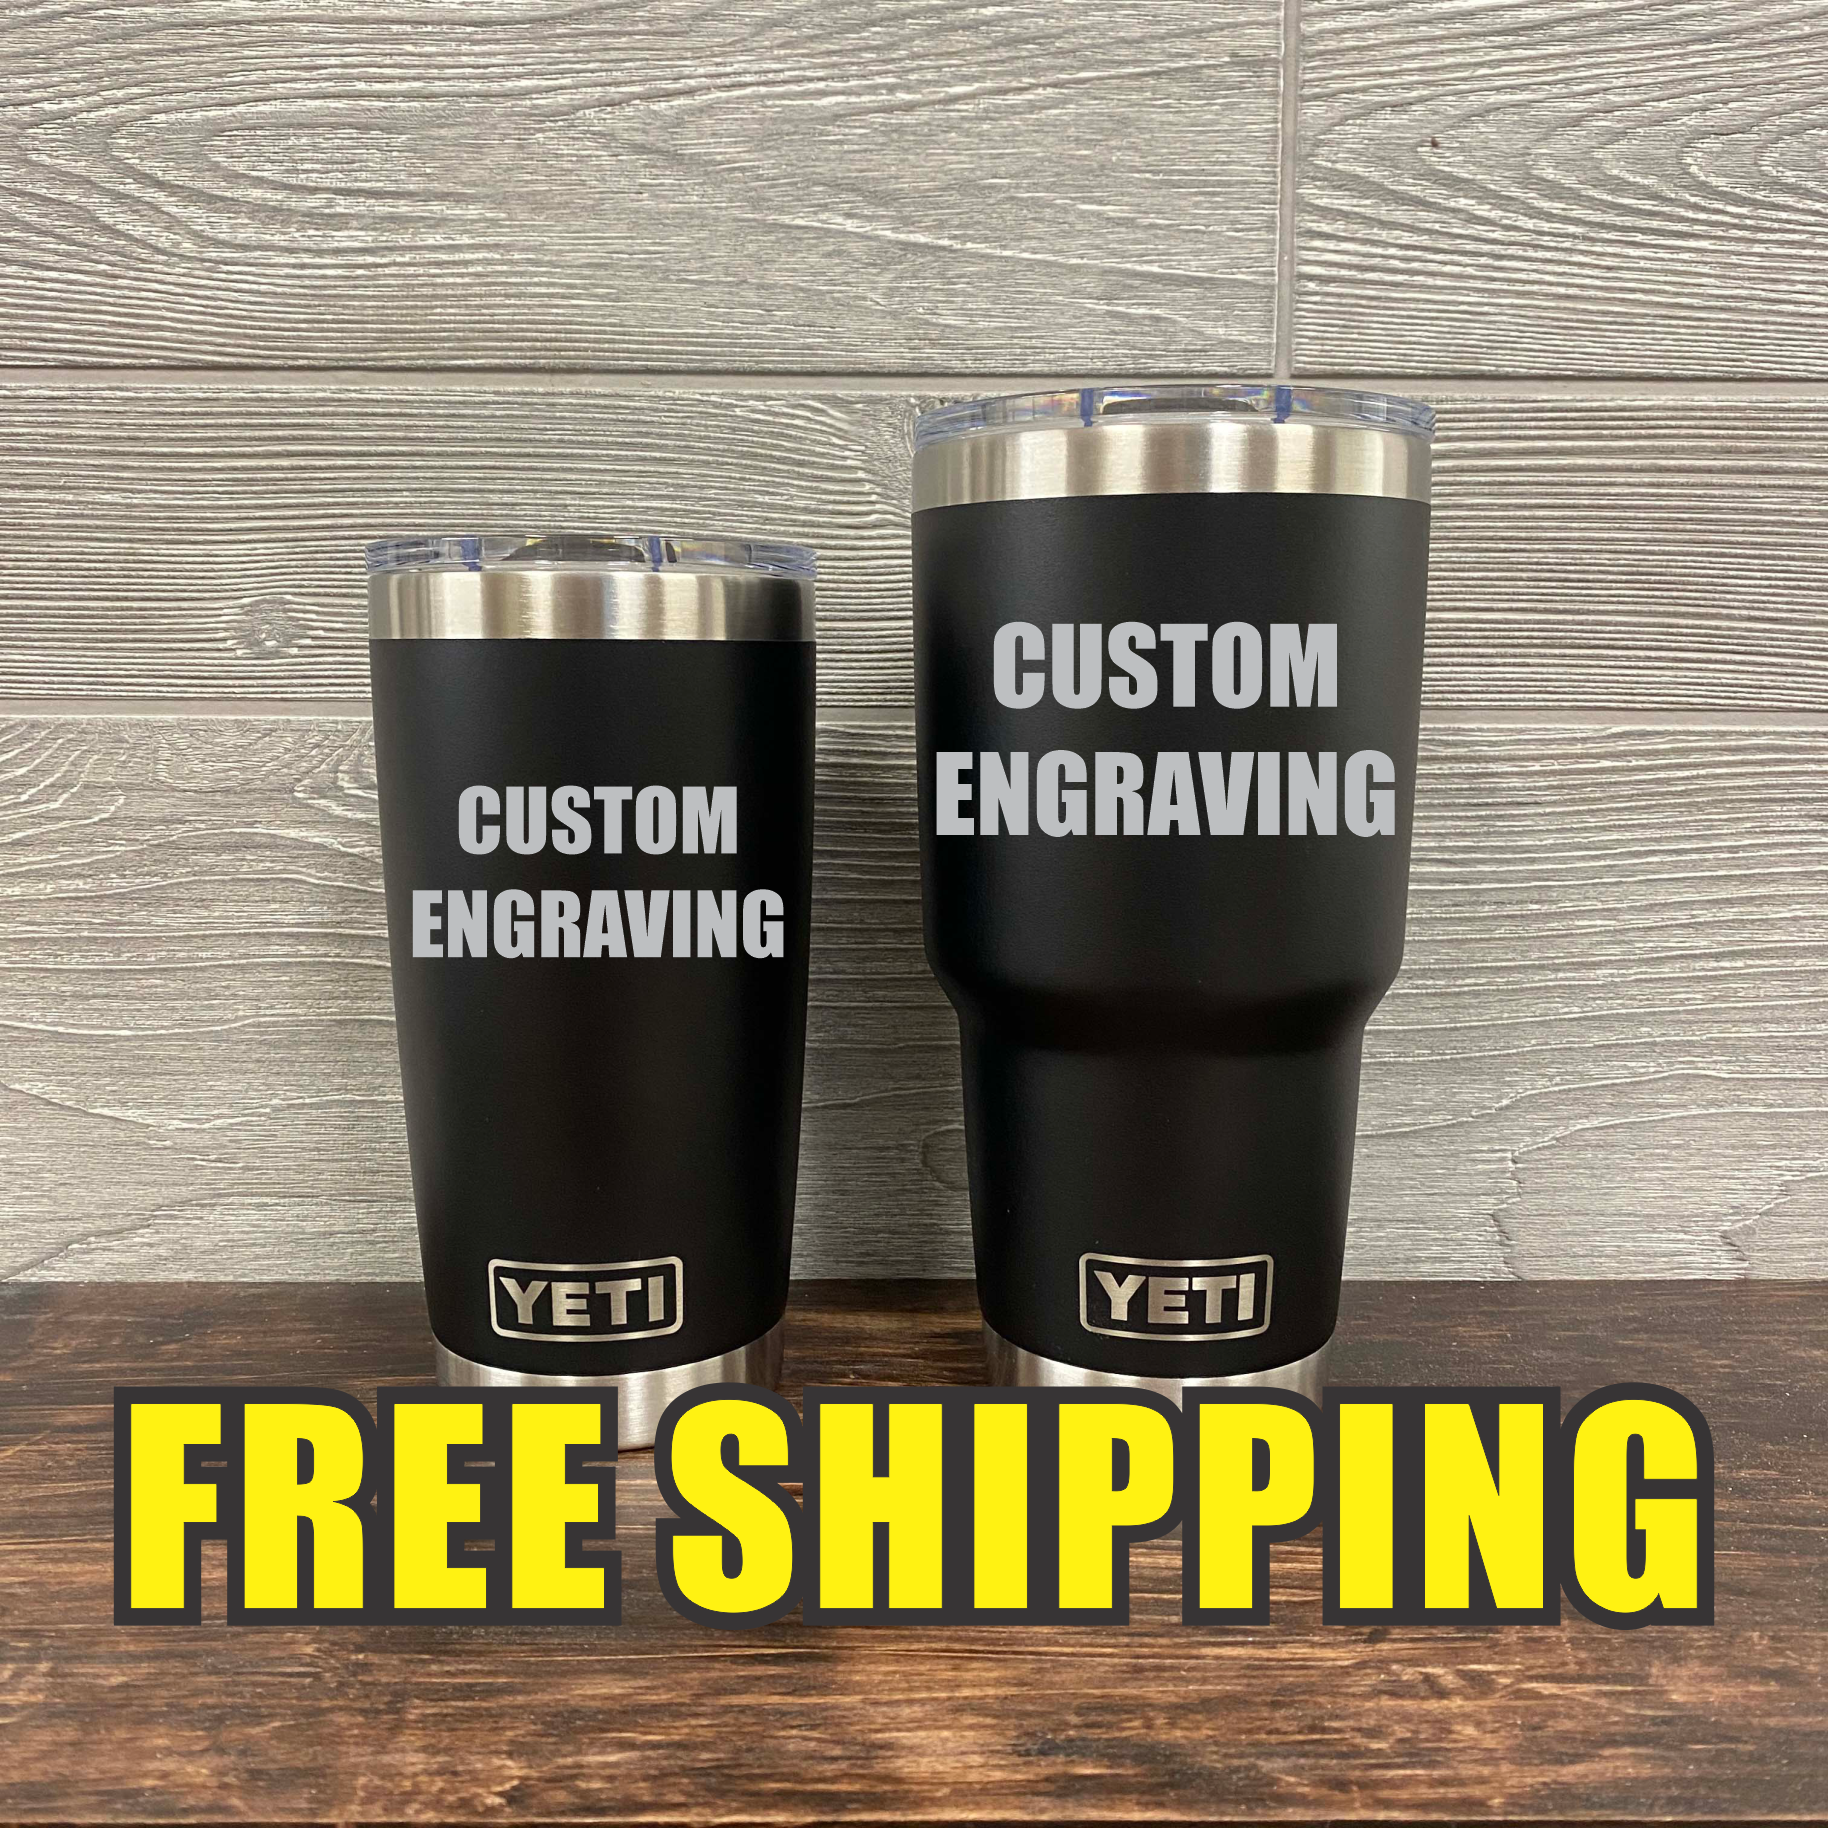 Yeti is offering free customization on several popular items for a